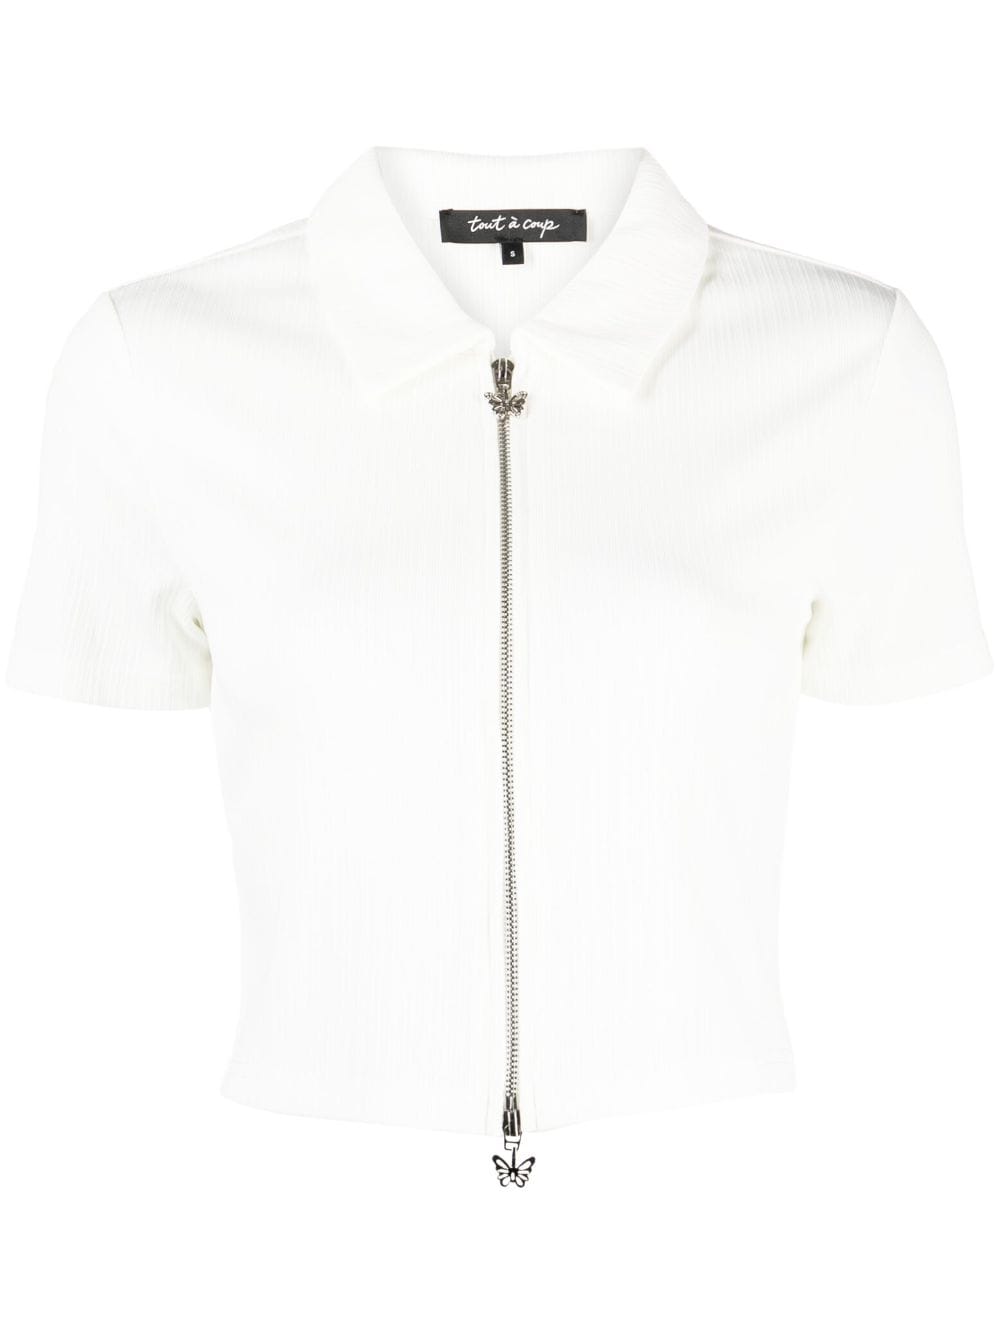 tout a coup short-sleeve zip-up blouse - White